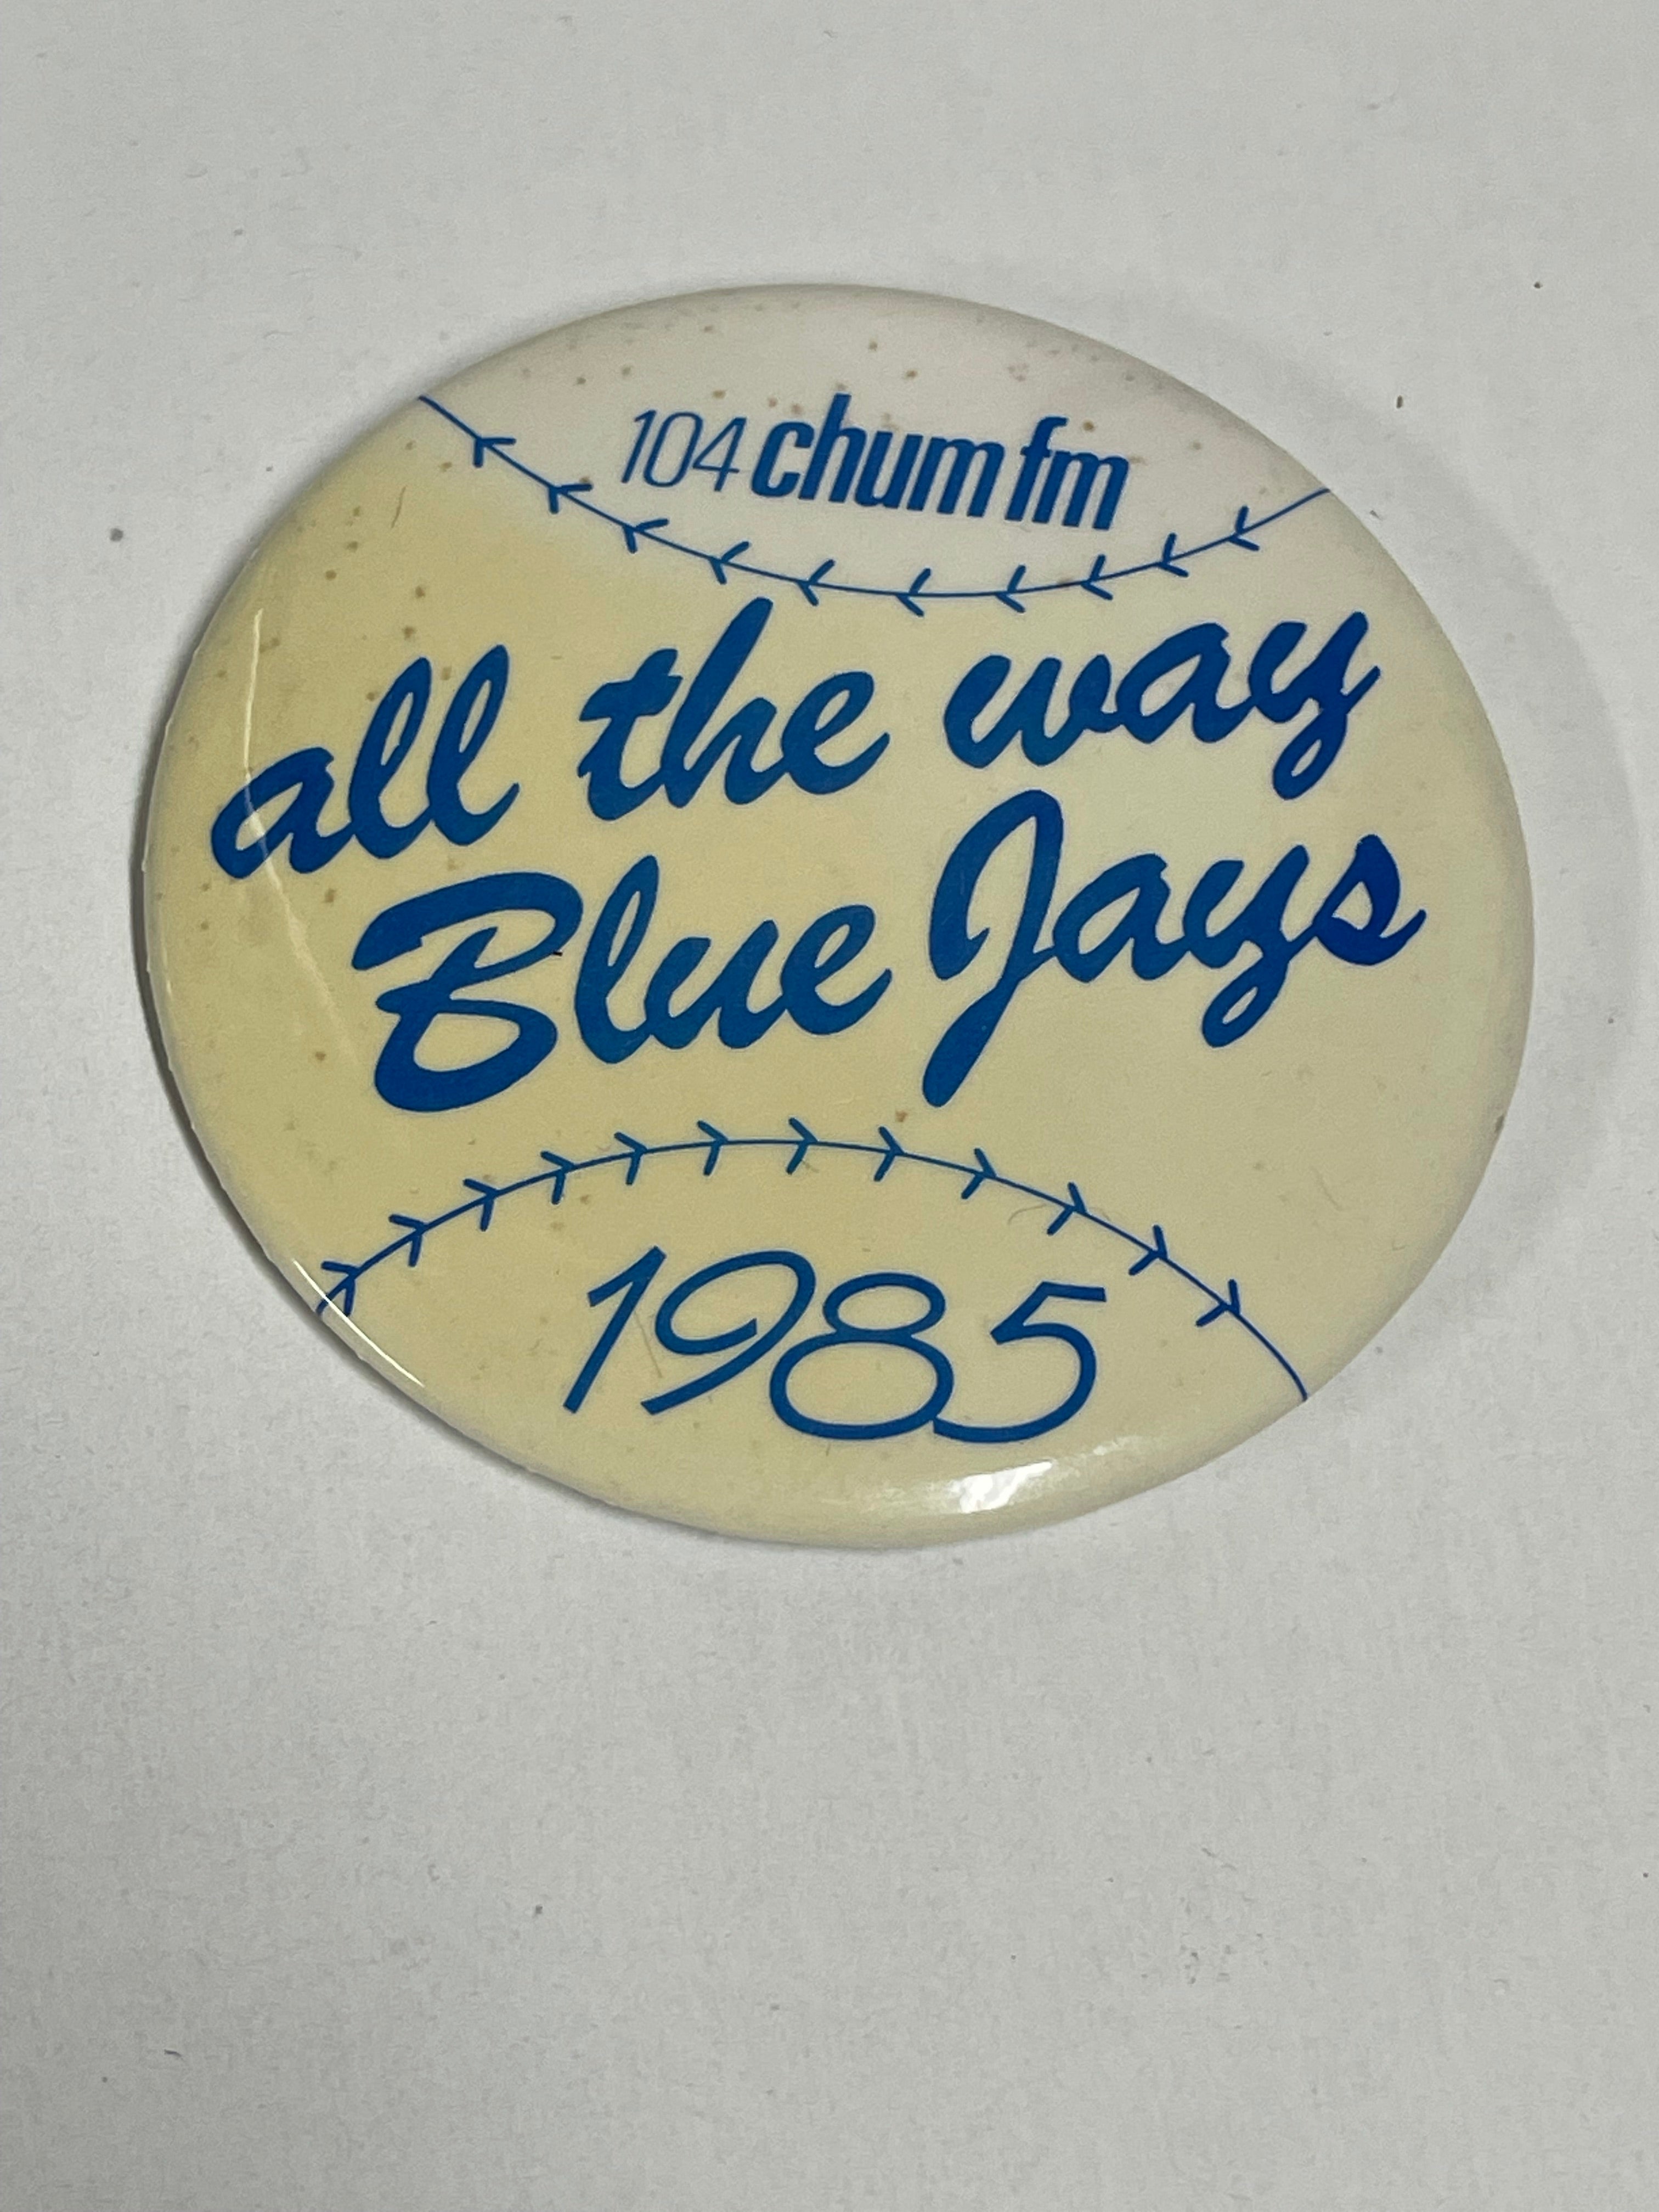 All the Way Blue Jays limited issue button 1985